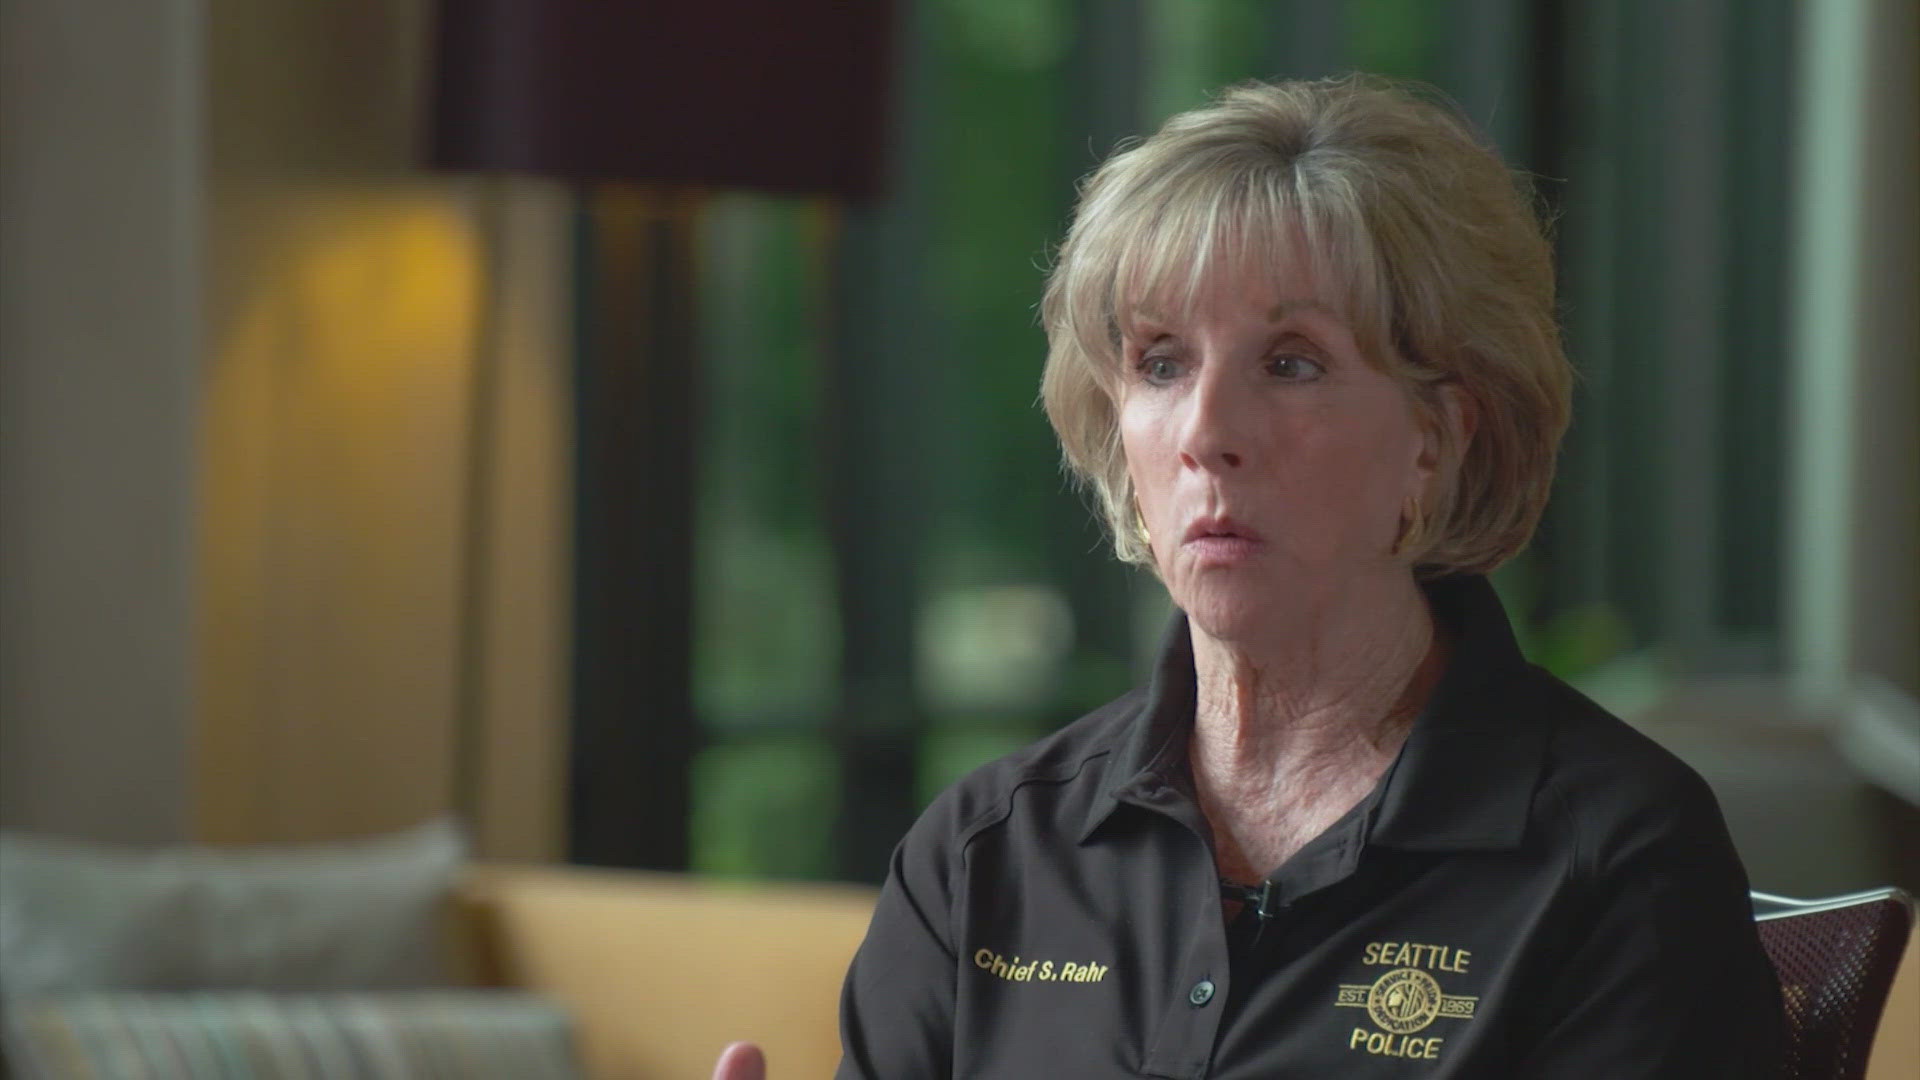 Seattle PD interim chief Sue Rahr says she is working to change the culture at the department, despite some recent decisions that have raised some concerns